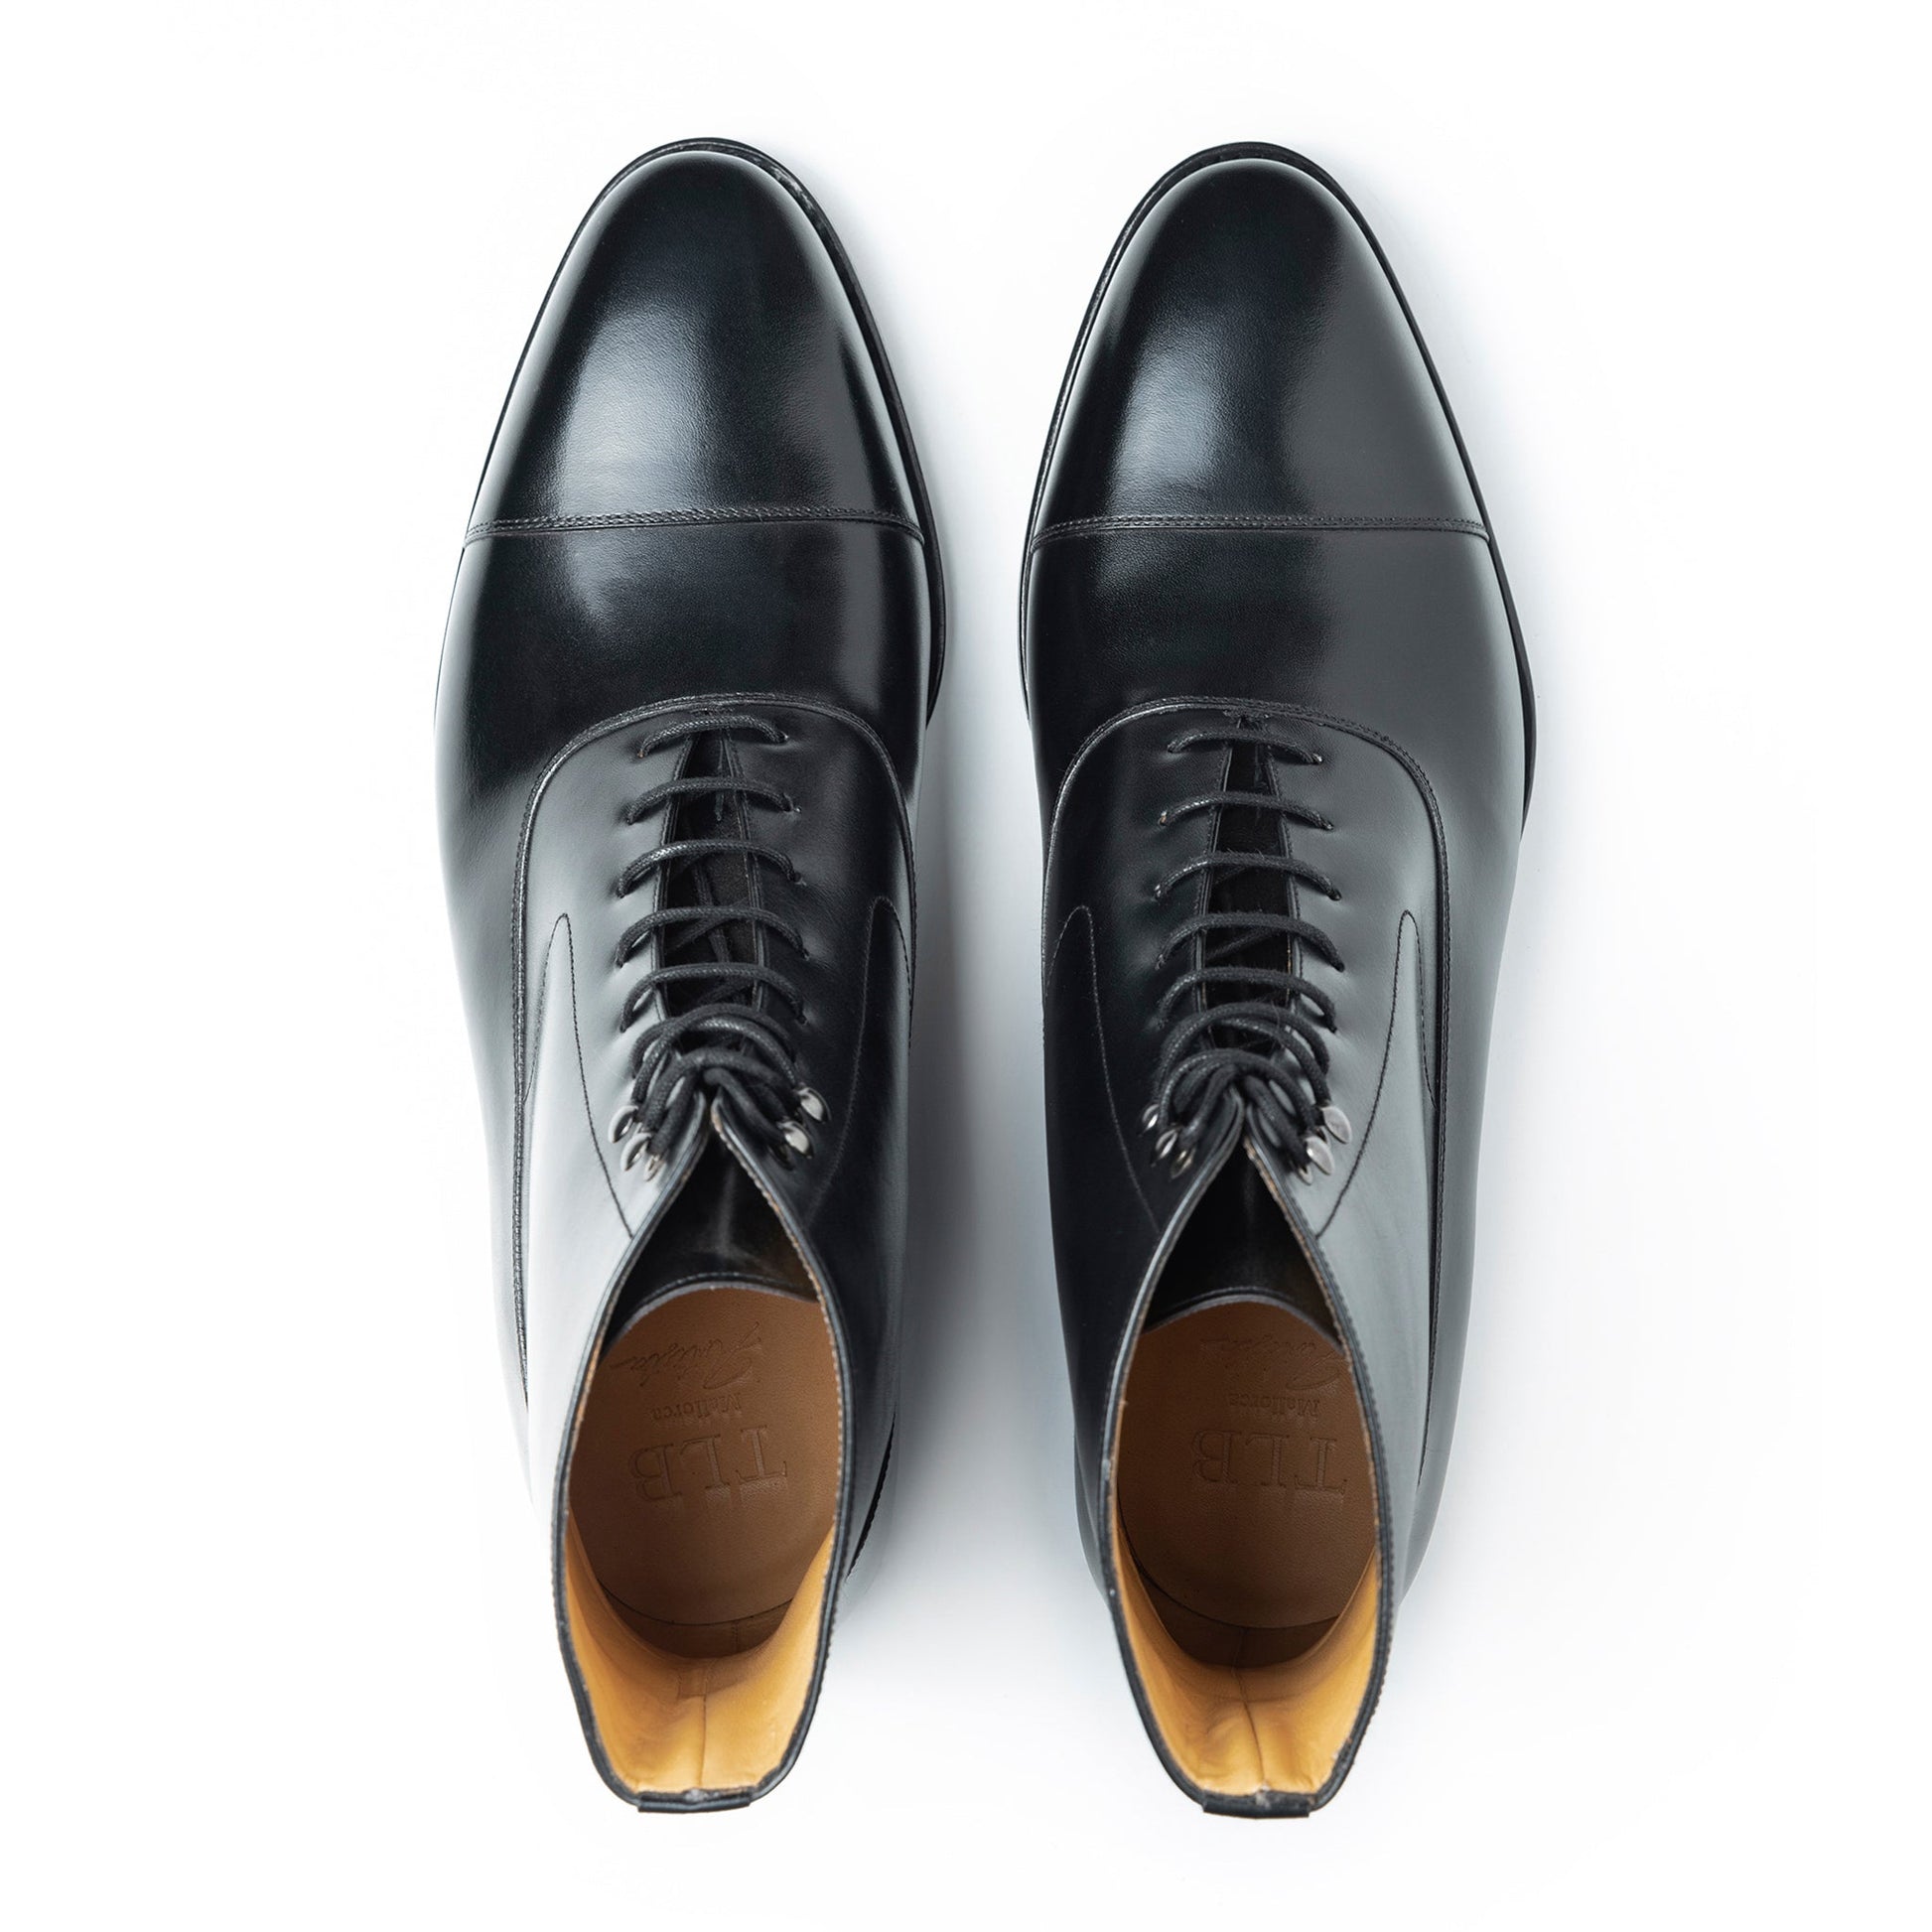 TLB Mallorca leather shoes - Men's Boots 